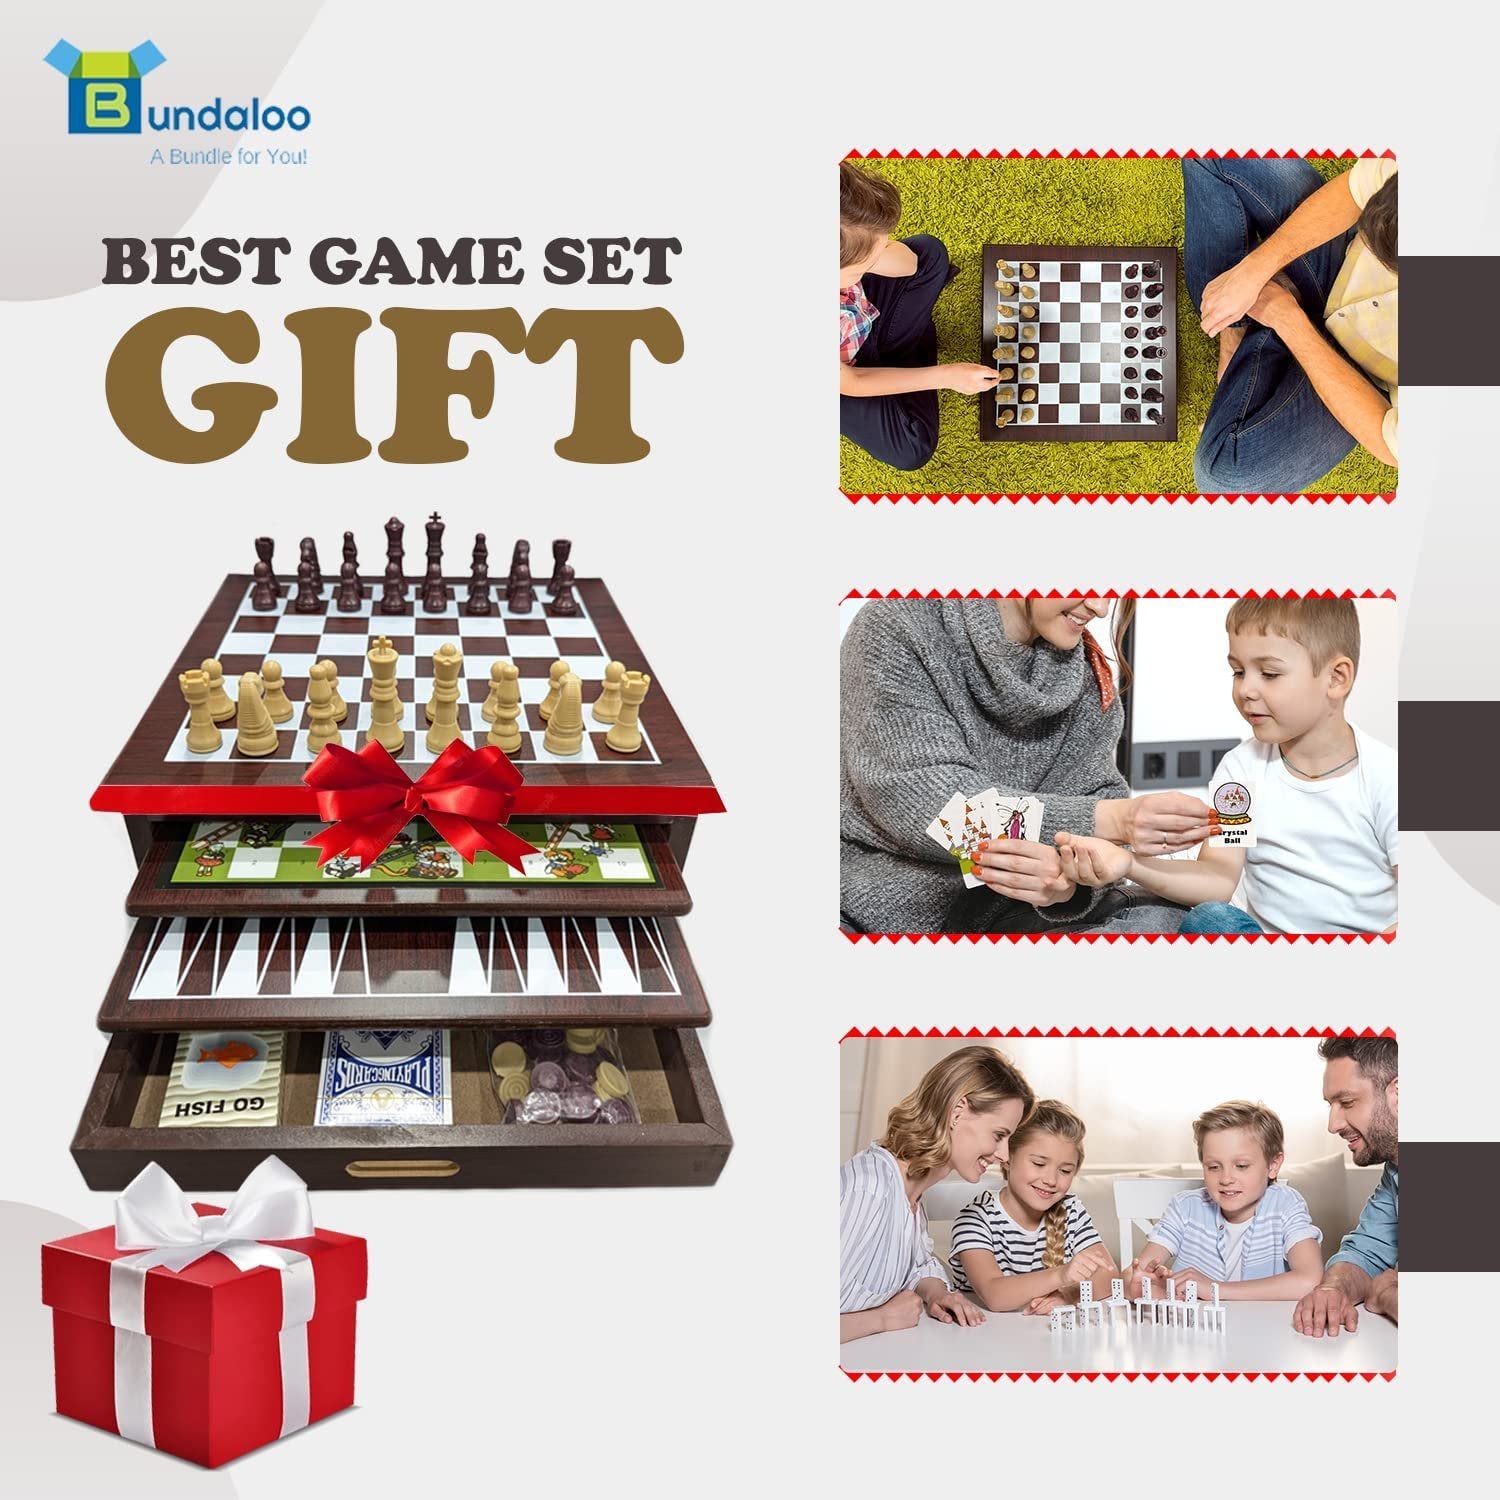 Bundaloo 15-in-1 Tabletop Game Center - Portable Wooden Combo Game Board with Classic Games - Unique Set with Dice, Dominos, Playing Cards & Game Pieces - for Kids & Adults - Wood Finish, 12x12x5.5